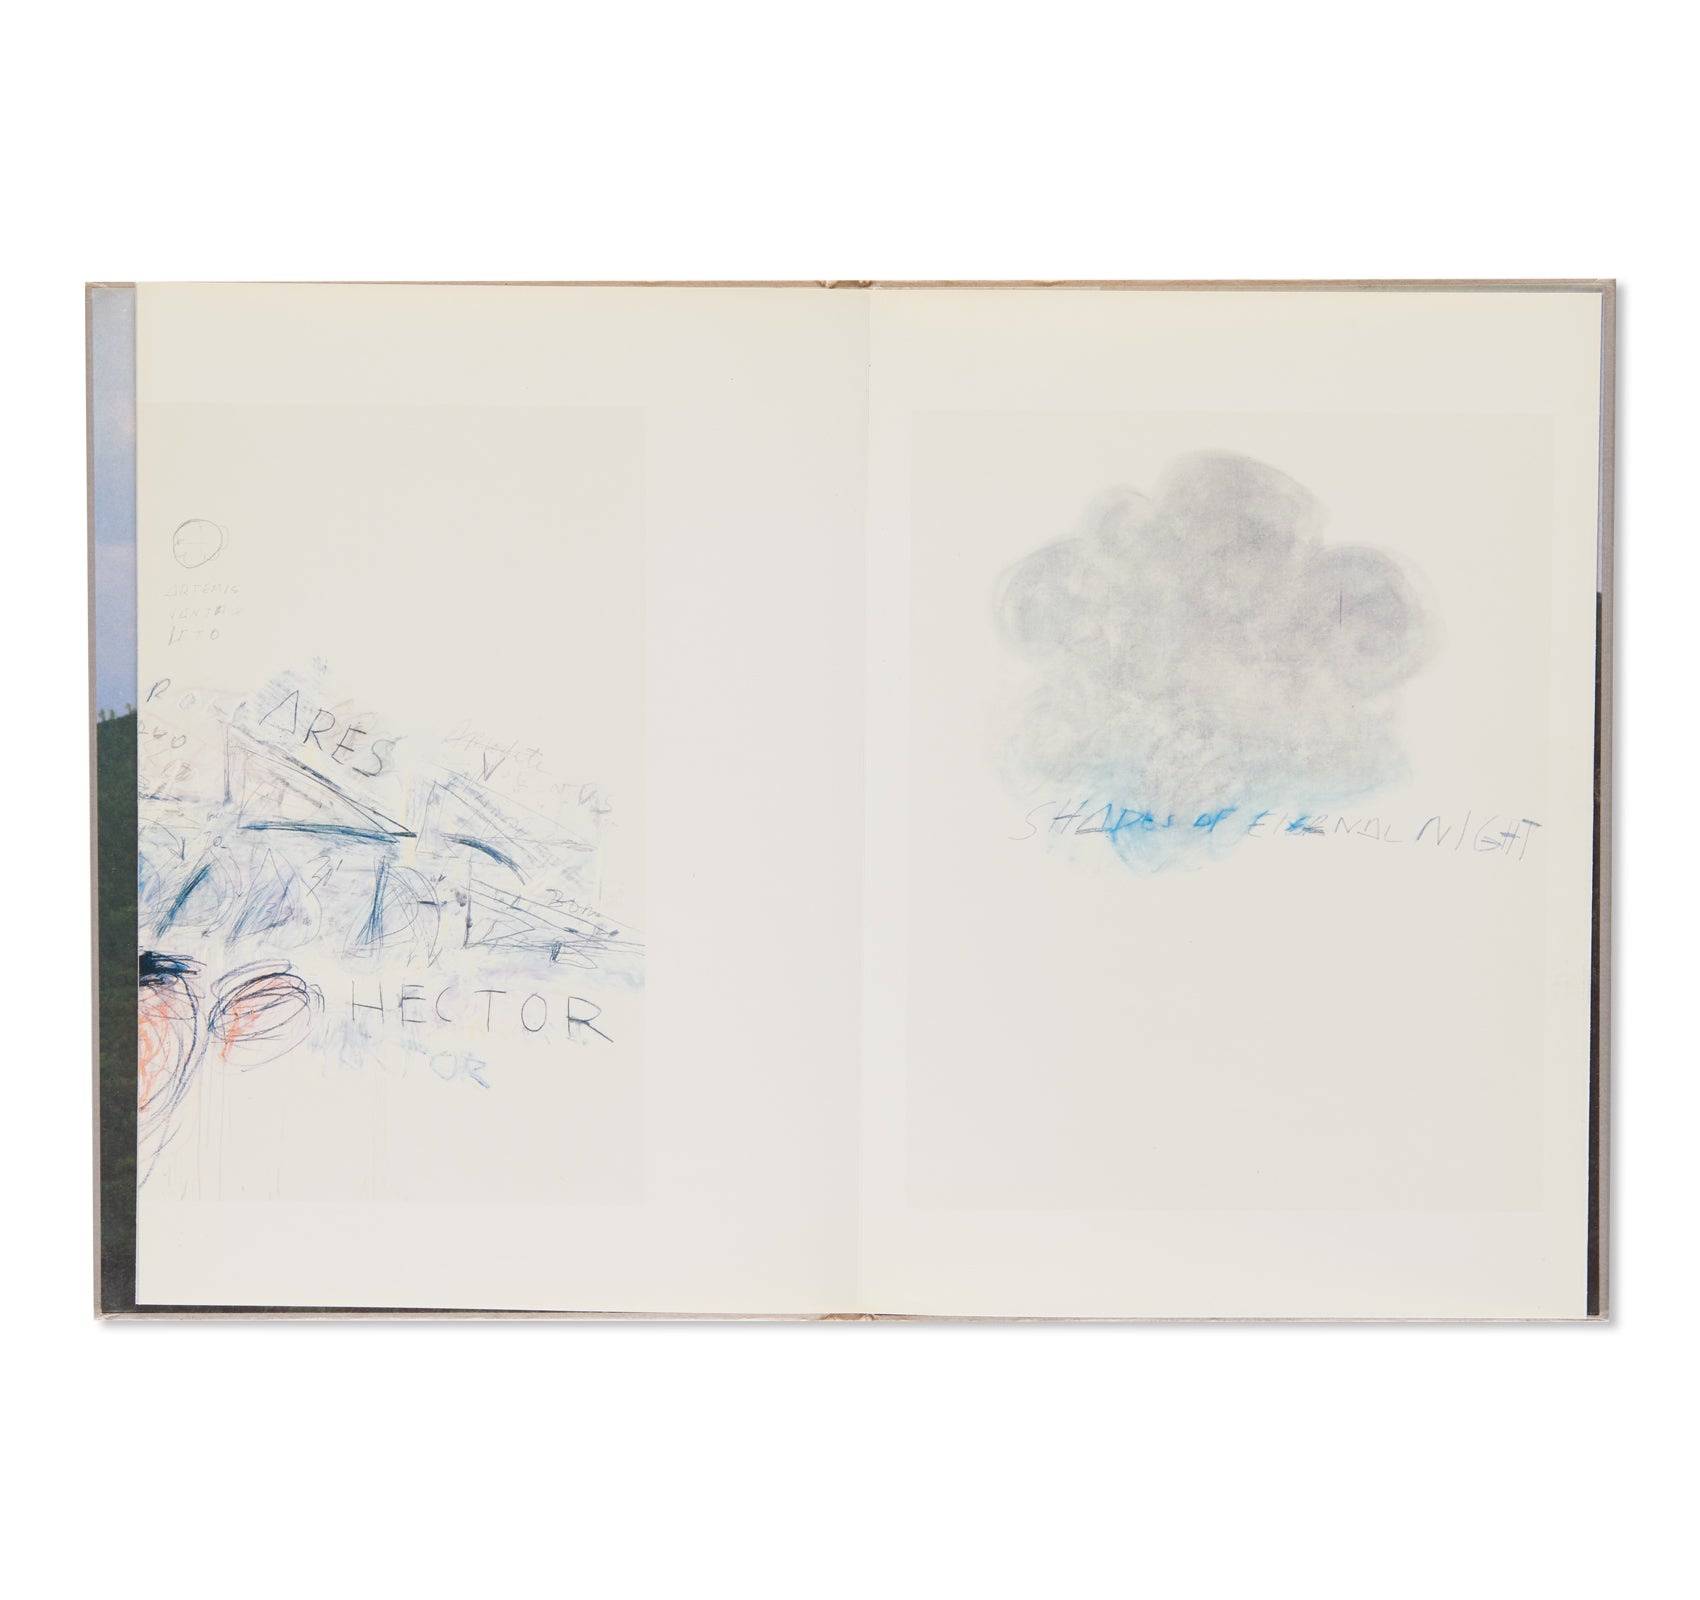 FIFTY DAYS AT ILIAM by Cy Twombly